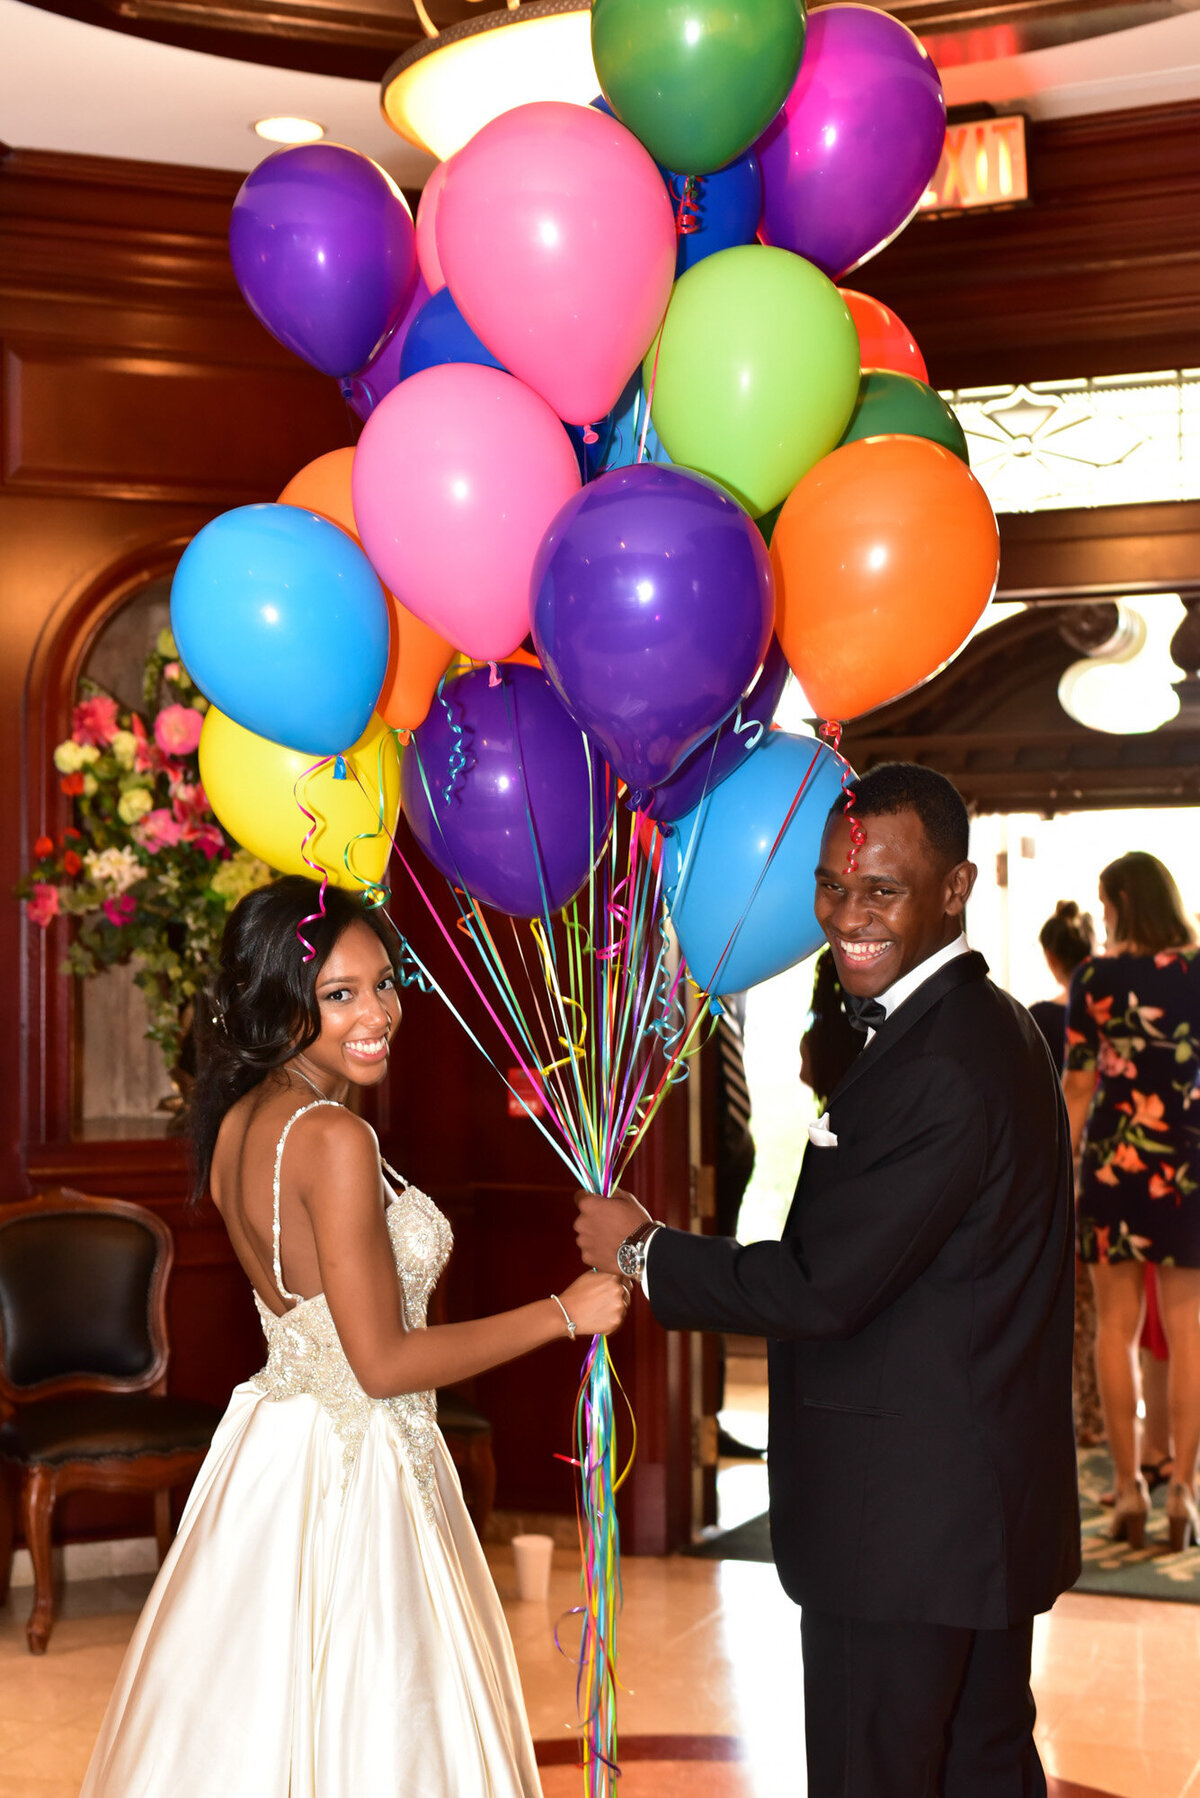 Newly wedded couple holding the strings of balloons while smiling